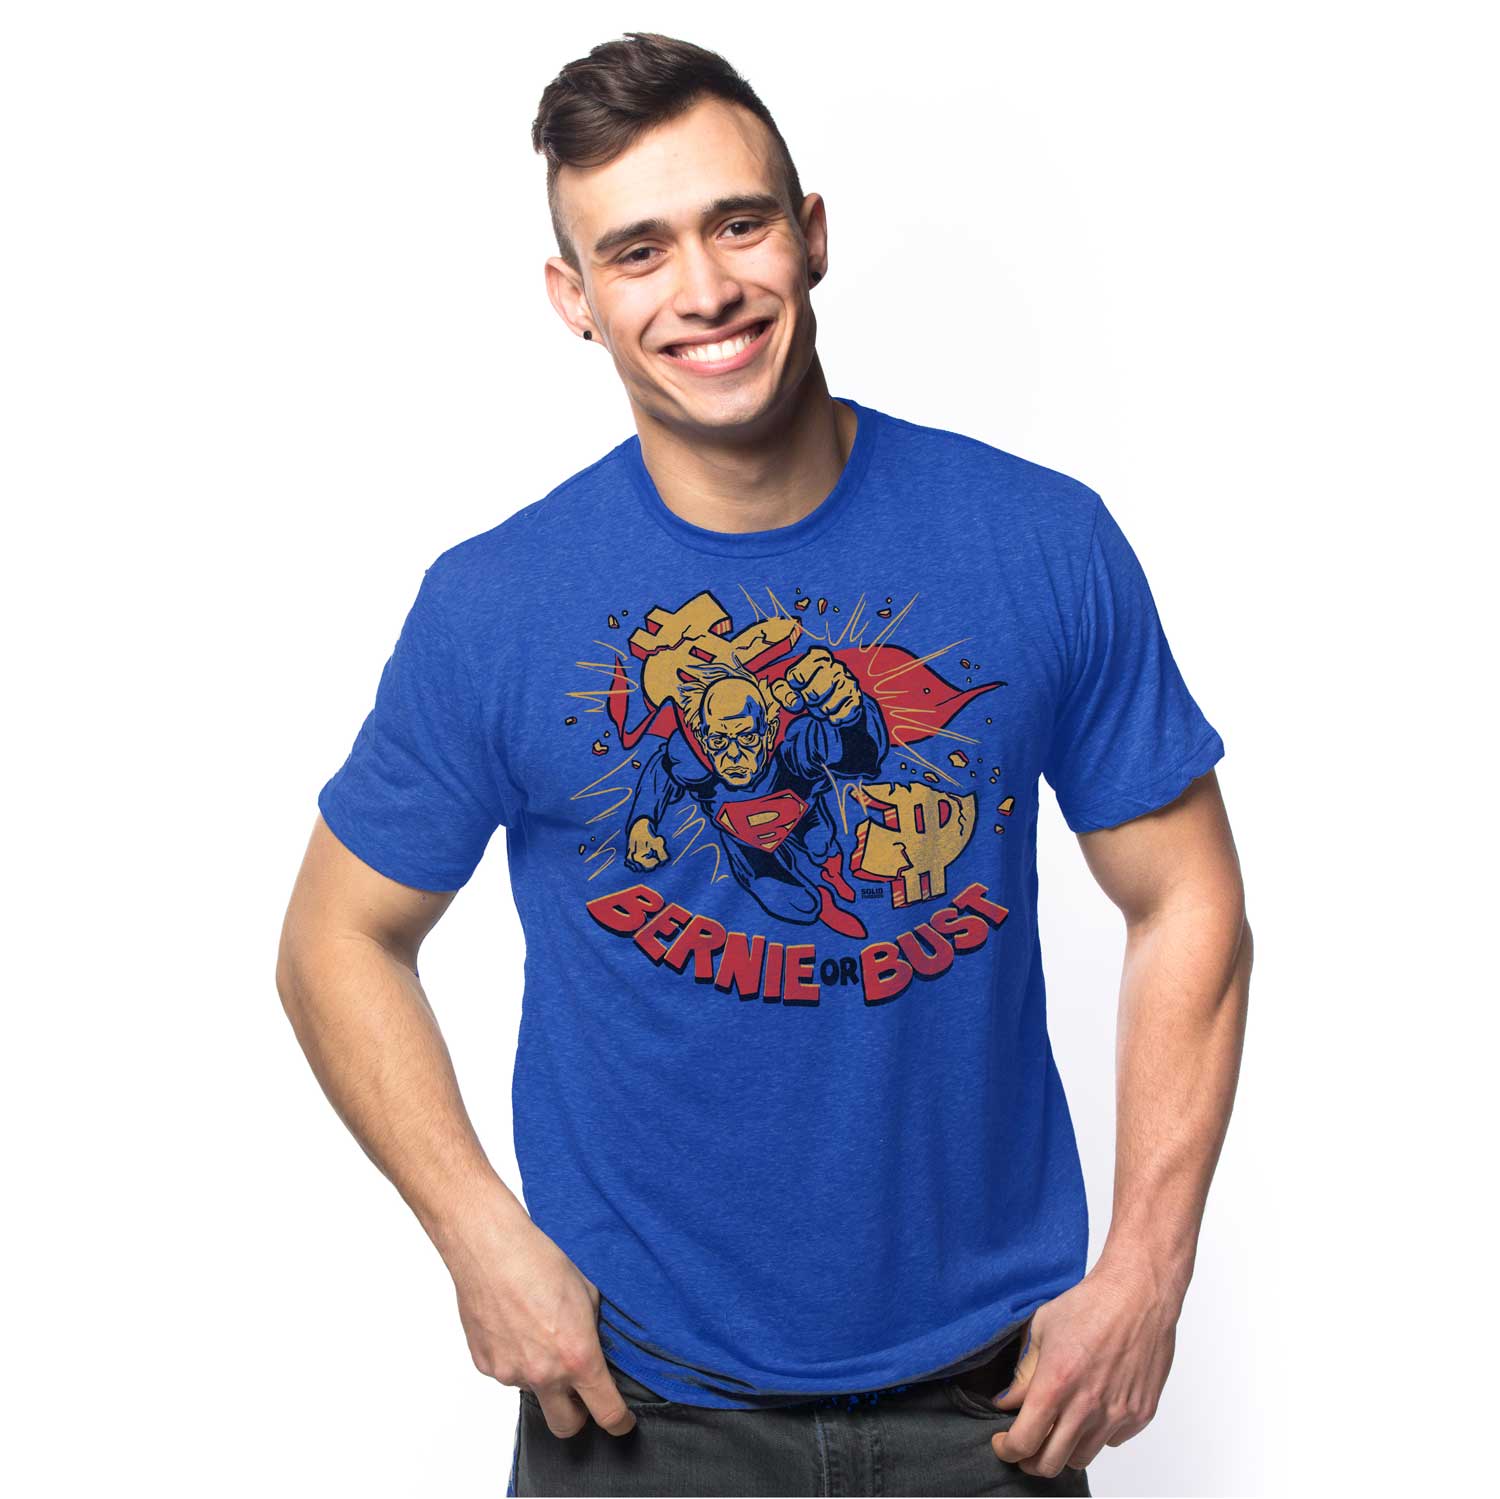 Bernie or Bust Vintage T-shirt | SOLID THREADS